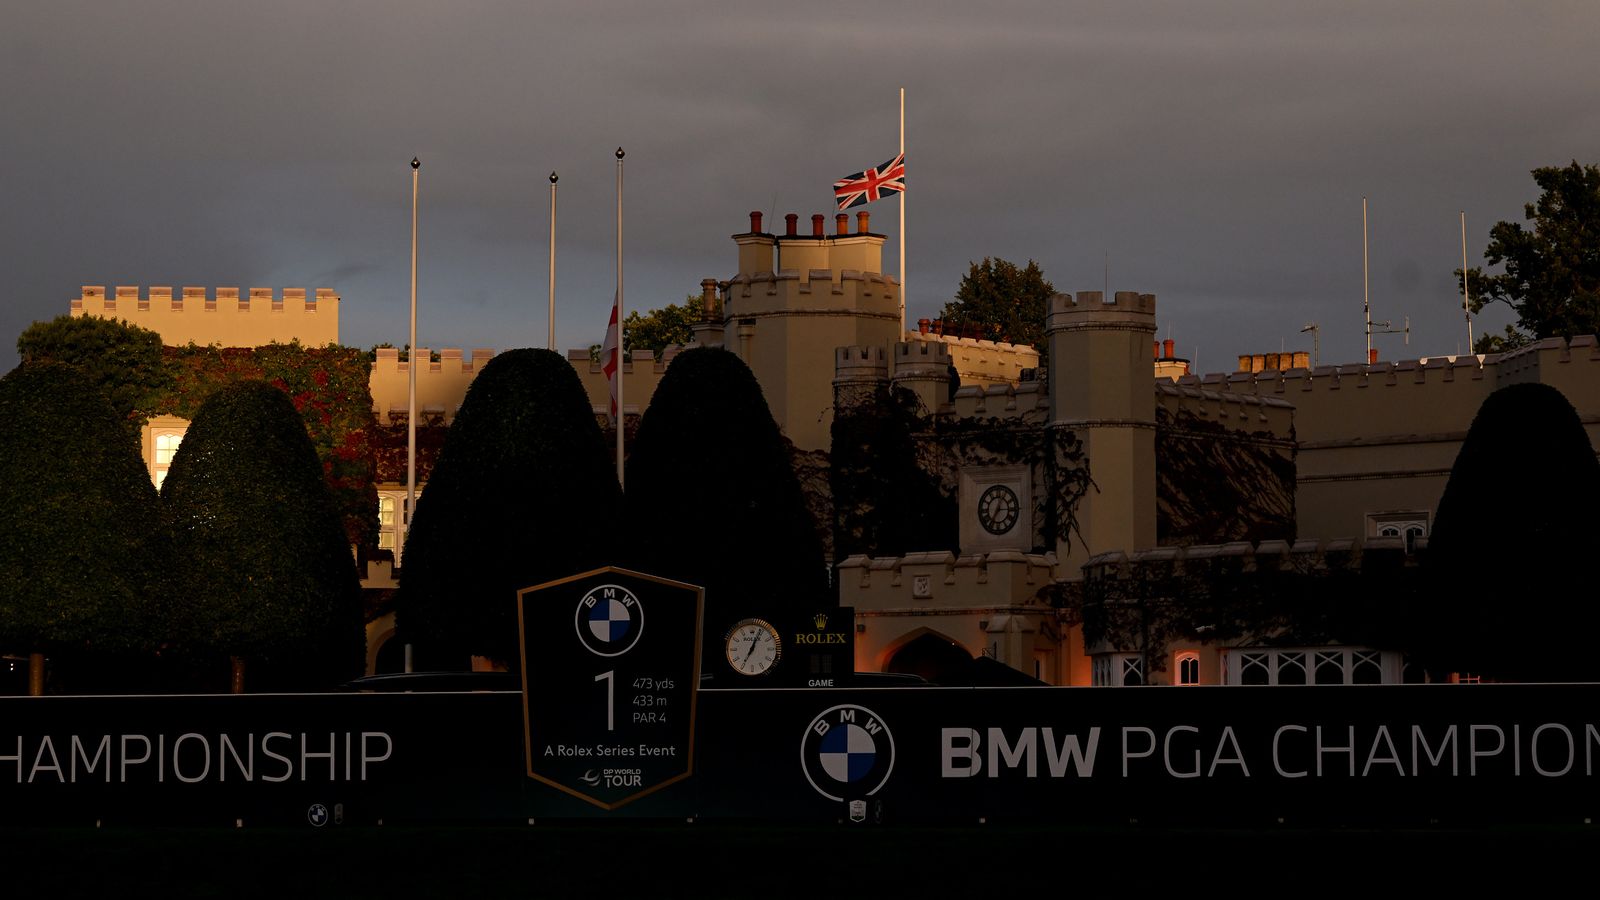 BMW PGA Championship: Updates from Wentworth as tournament resumes after death of Her Majesty